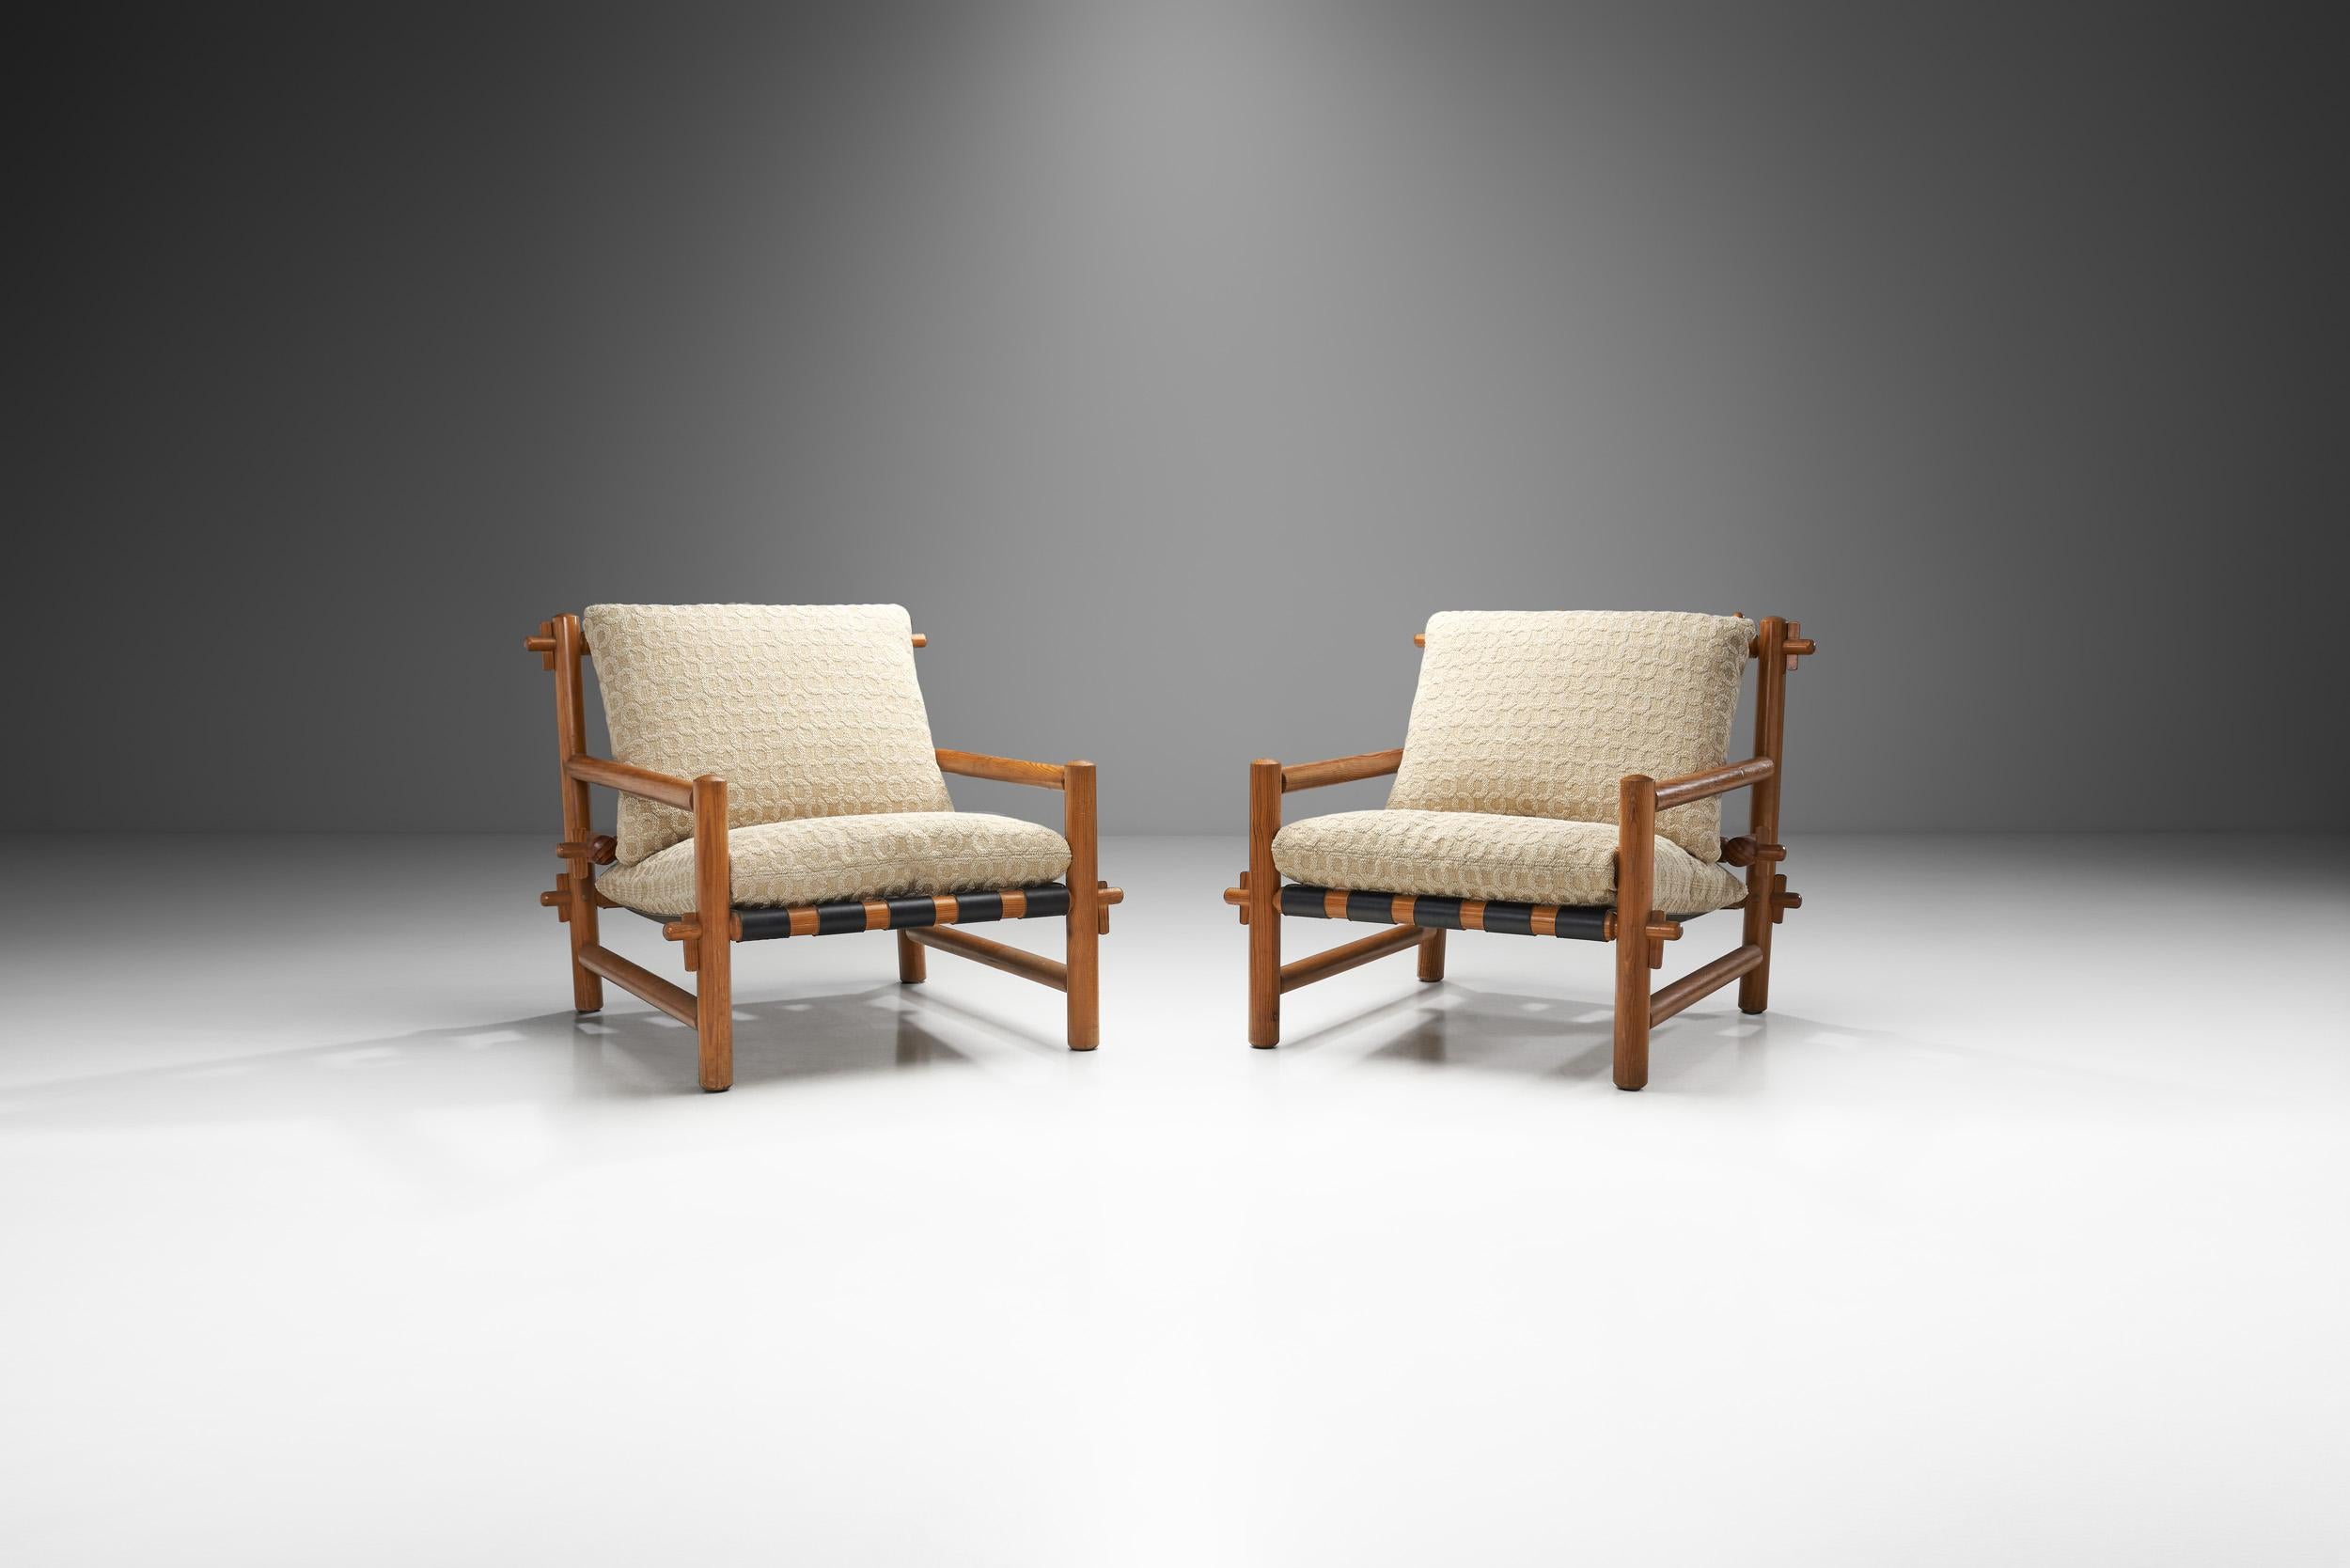 This pair of late mid-century French armchairs combines a visually stunning structural body with an expert construction technique and high-quality materials. In France, the 1960s saw brilliant designers and architects working to create furniture of